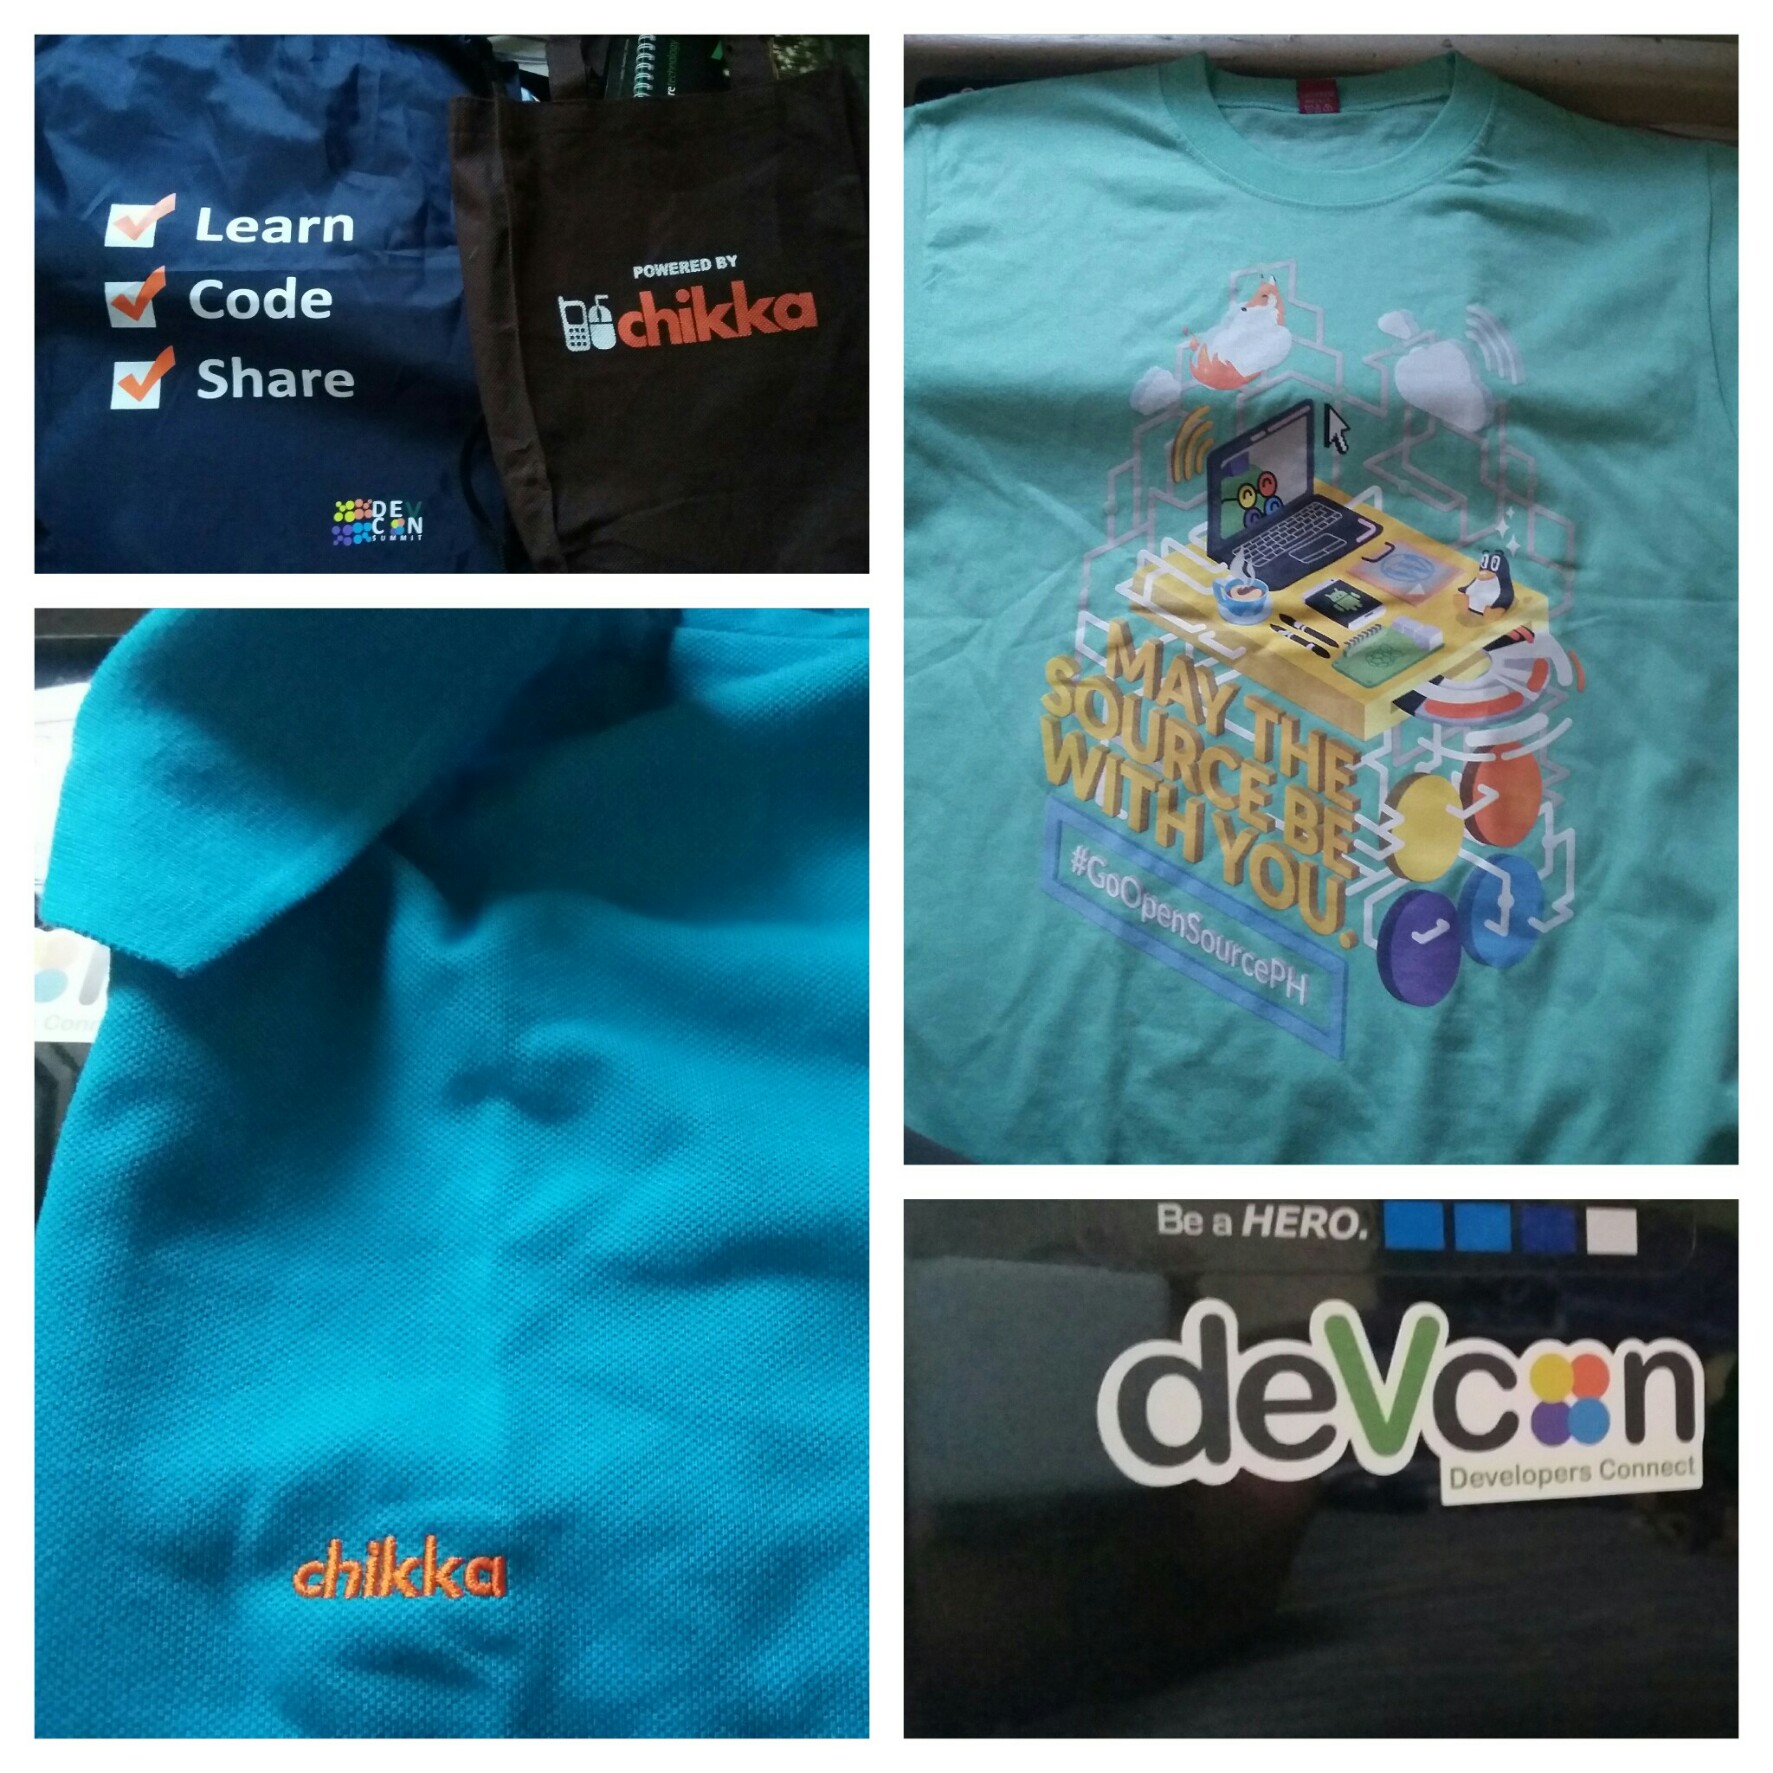 Chikka and DevCon T-shirts and bag